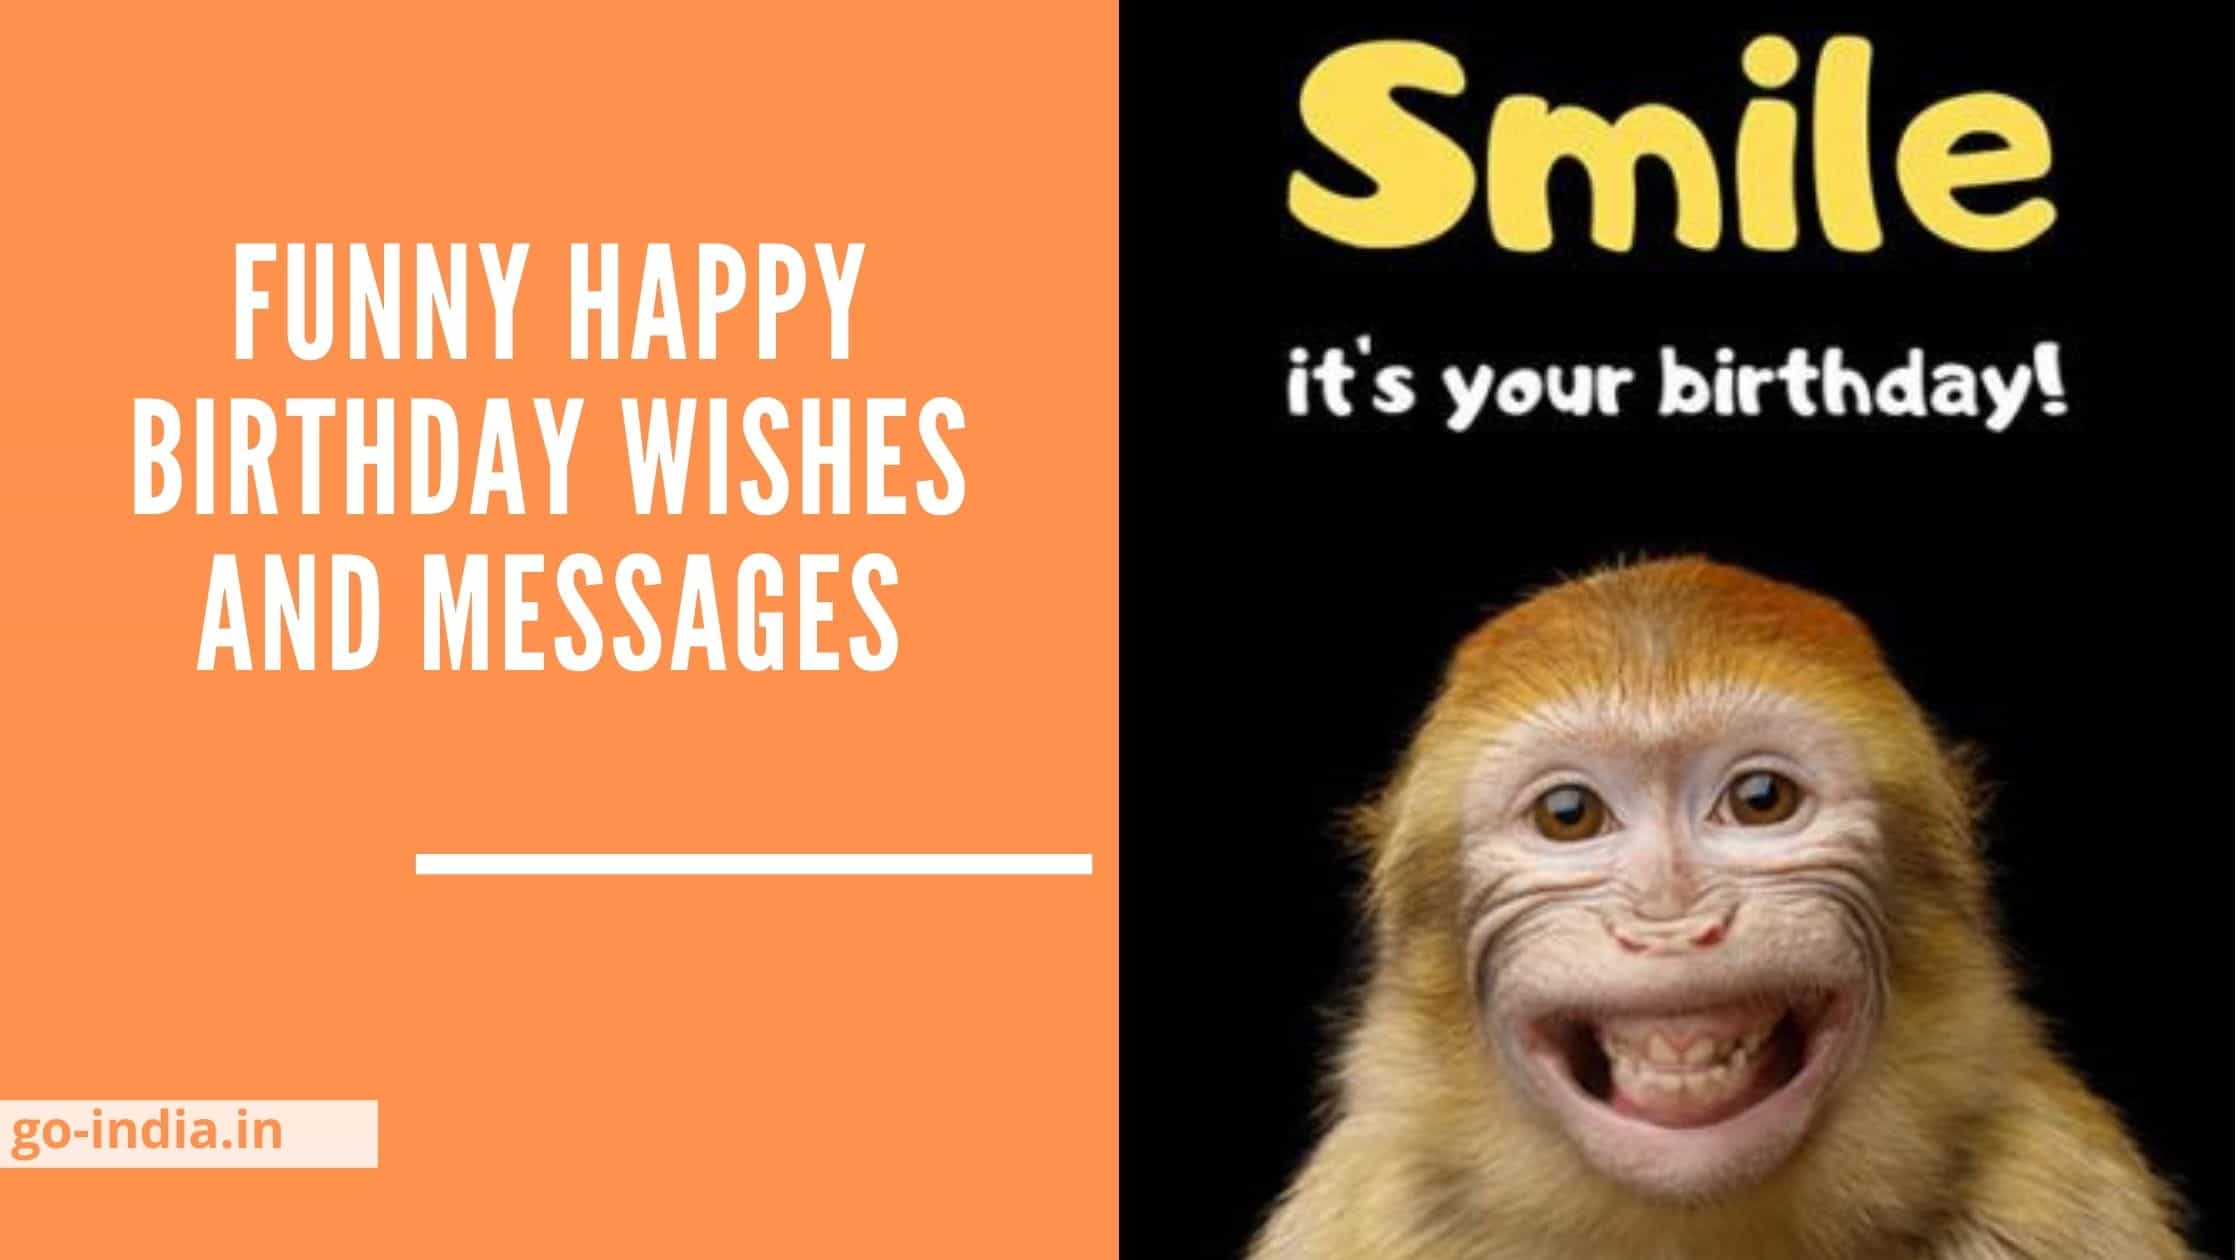 Funny Happy Birthday Wishes Cards